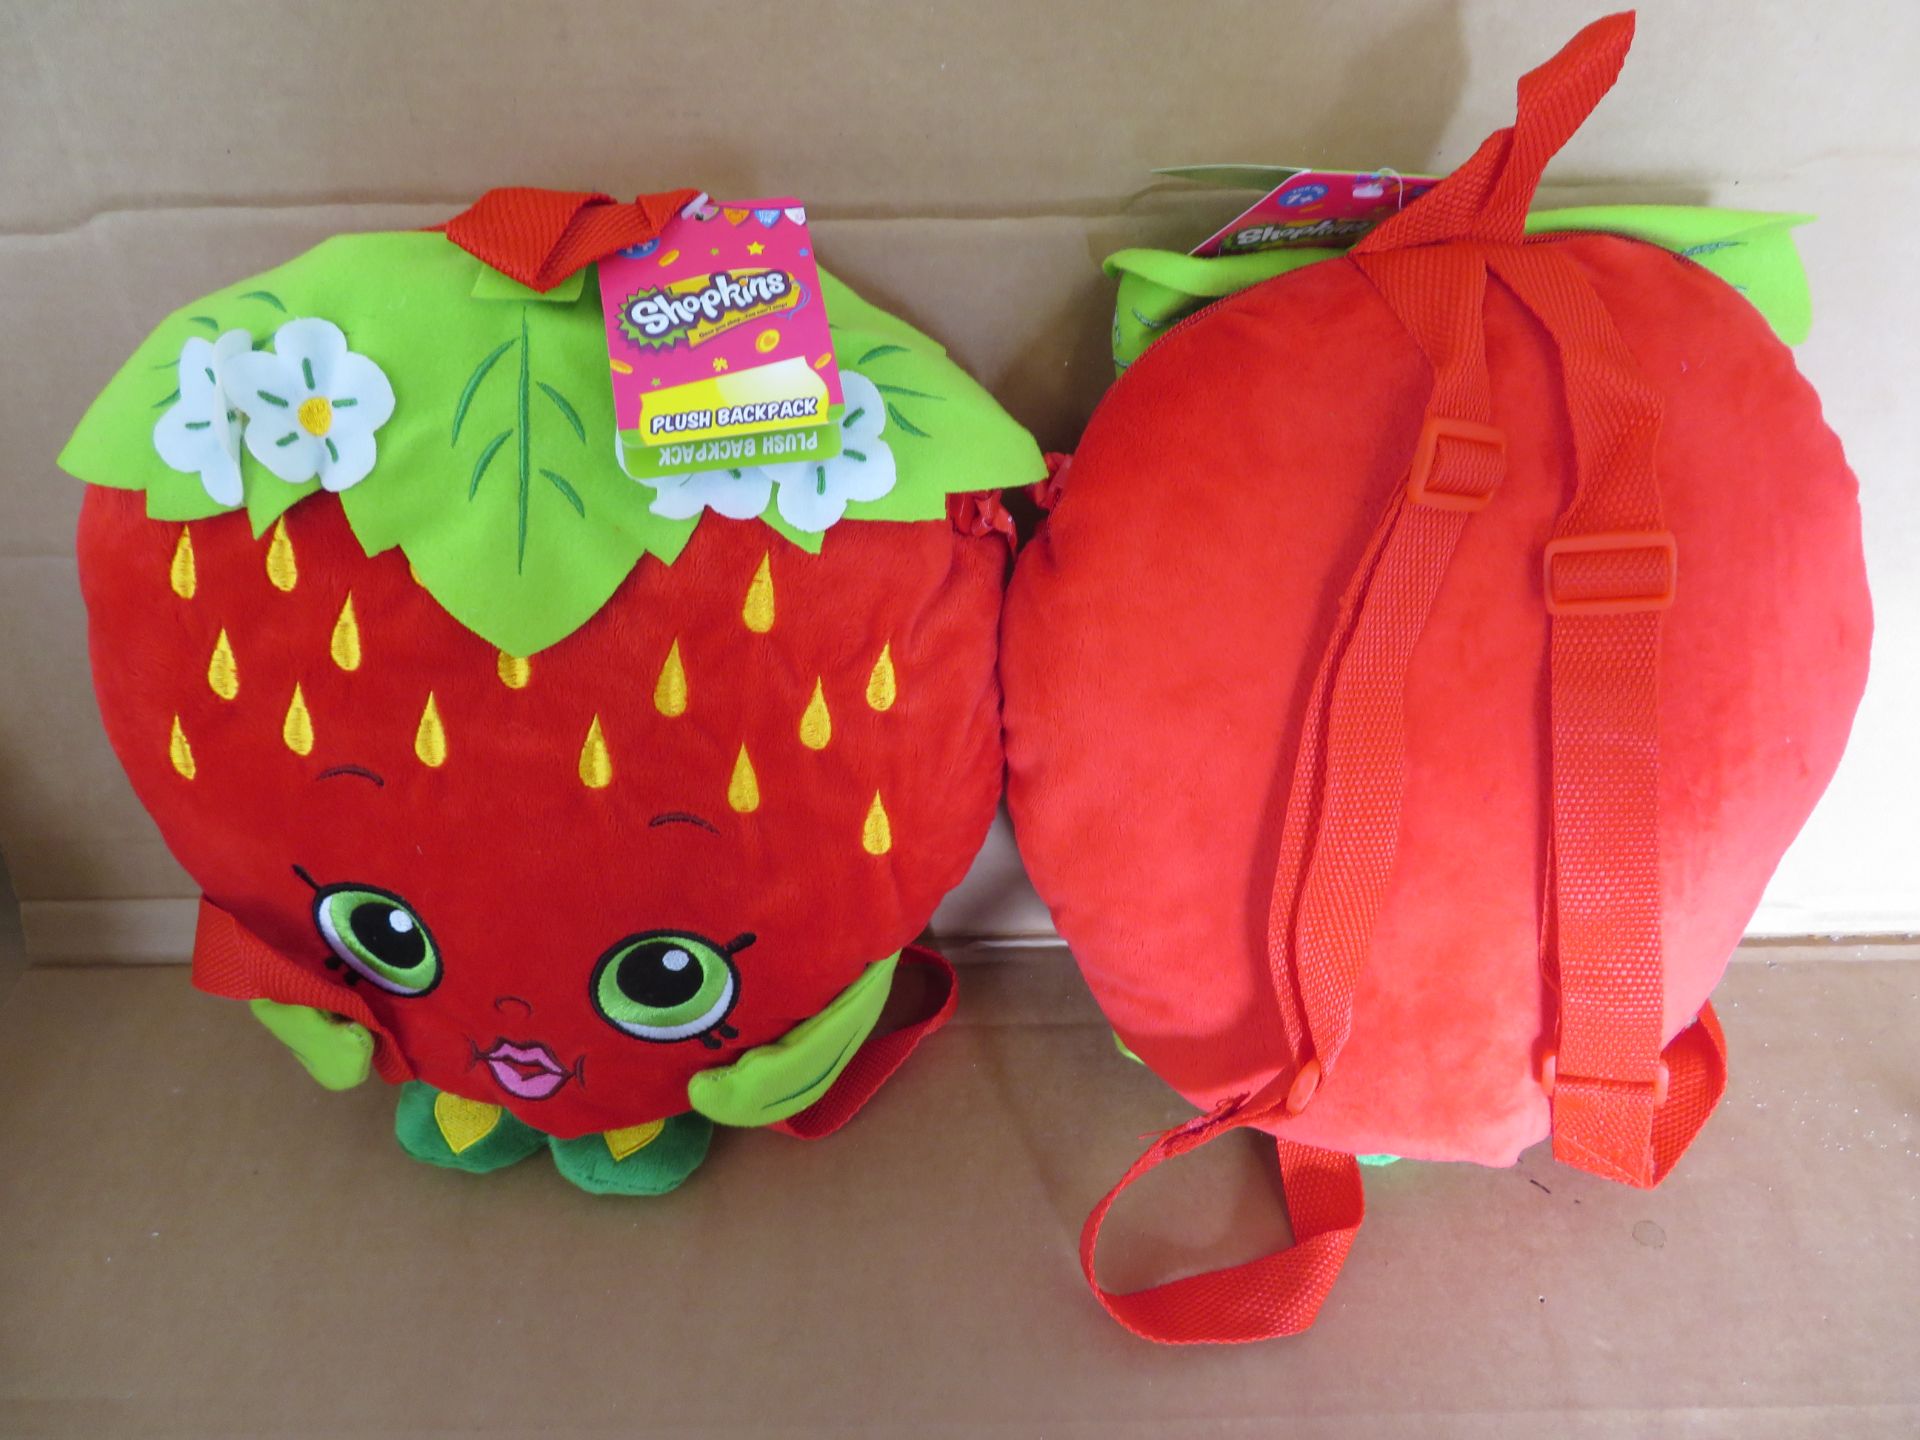 20 x Brand New Shopkins Strawberry Plush Back Pack's. RRP £19.99 each - giving this lot total